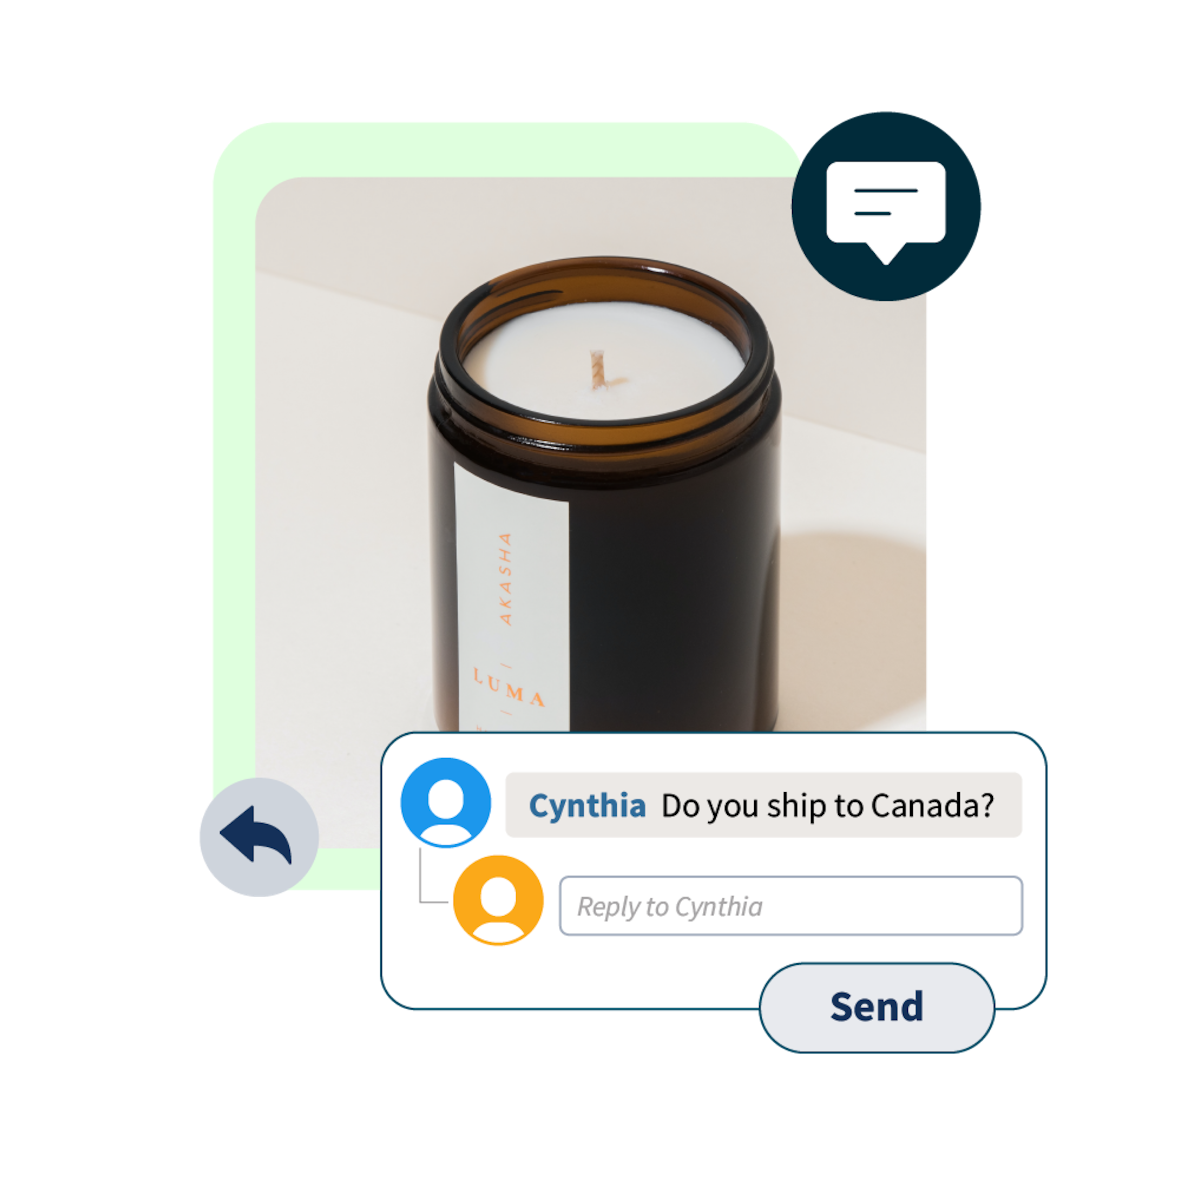 Image of a candle with a message pop-up saying "do you ship to canada?"